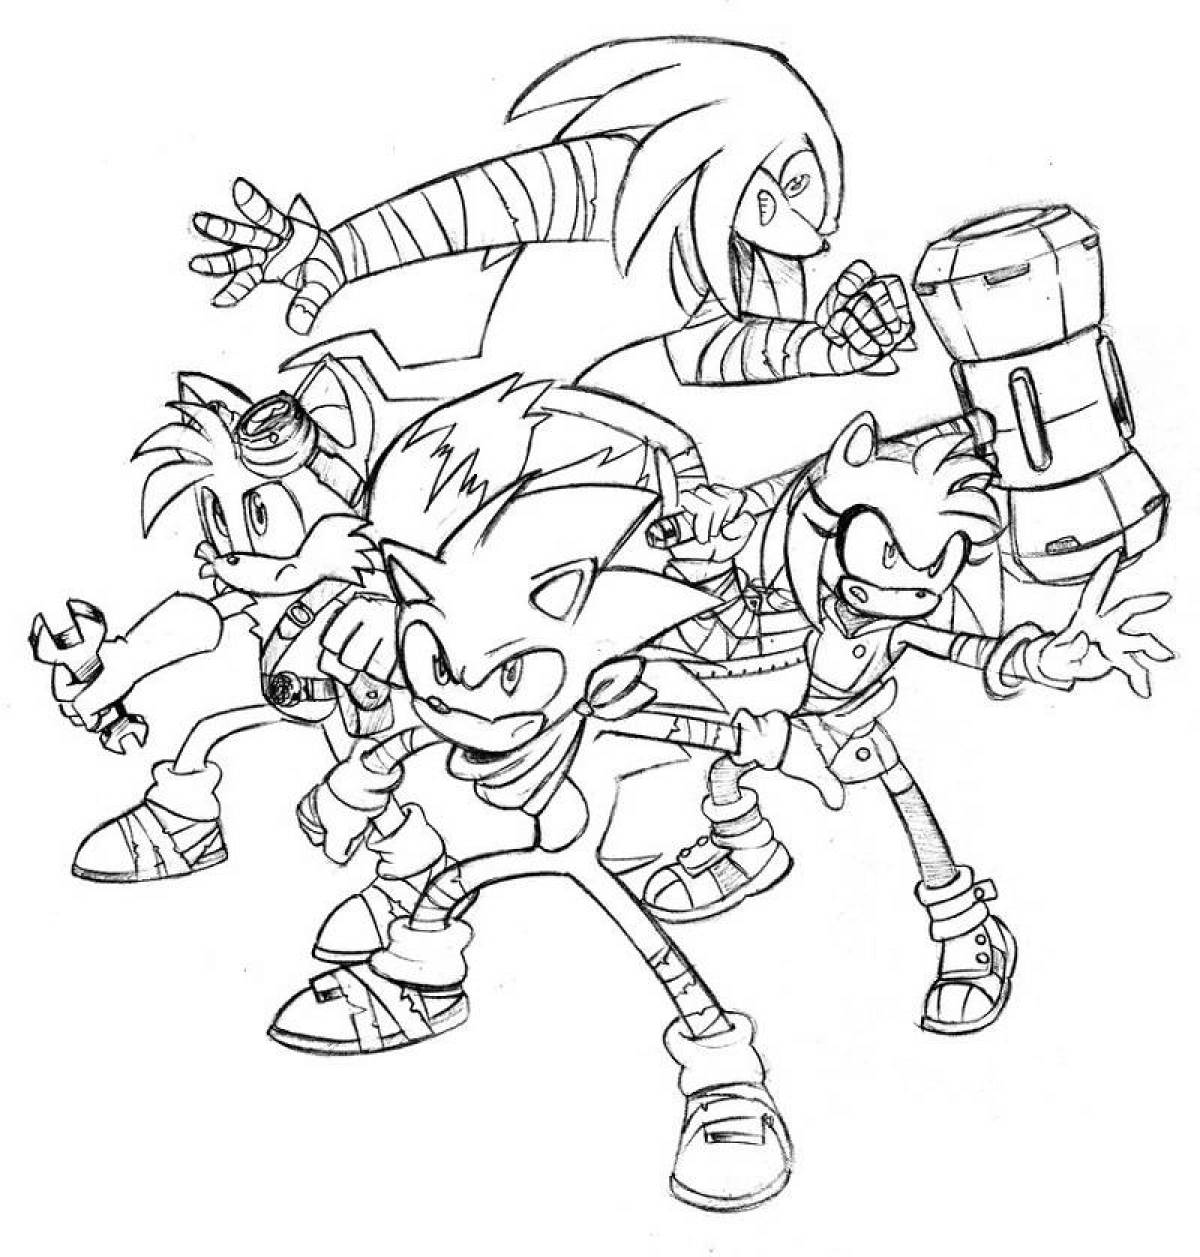 Sonic and friends #15